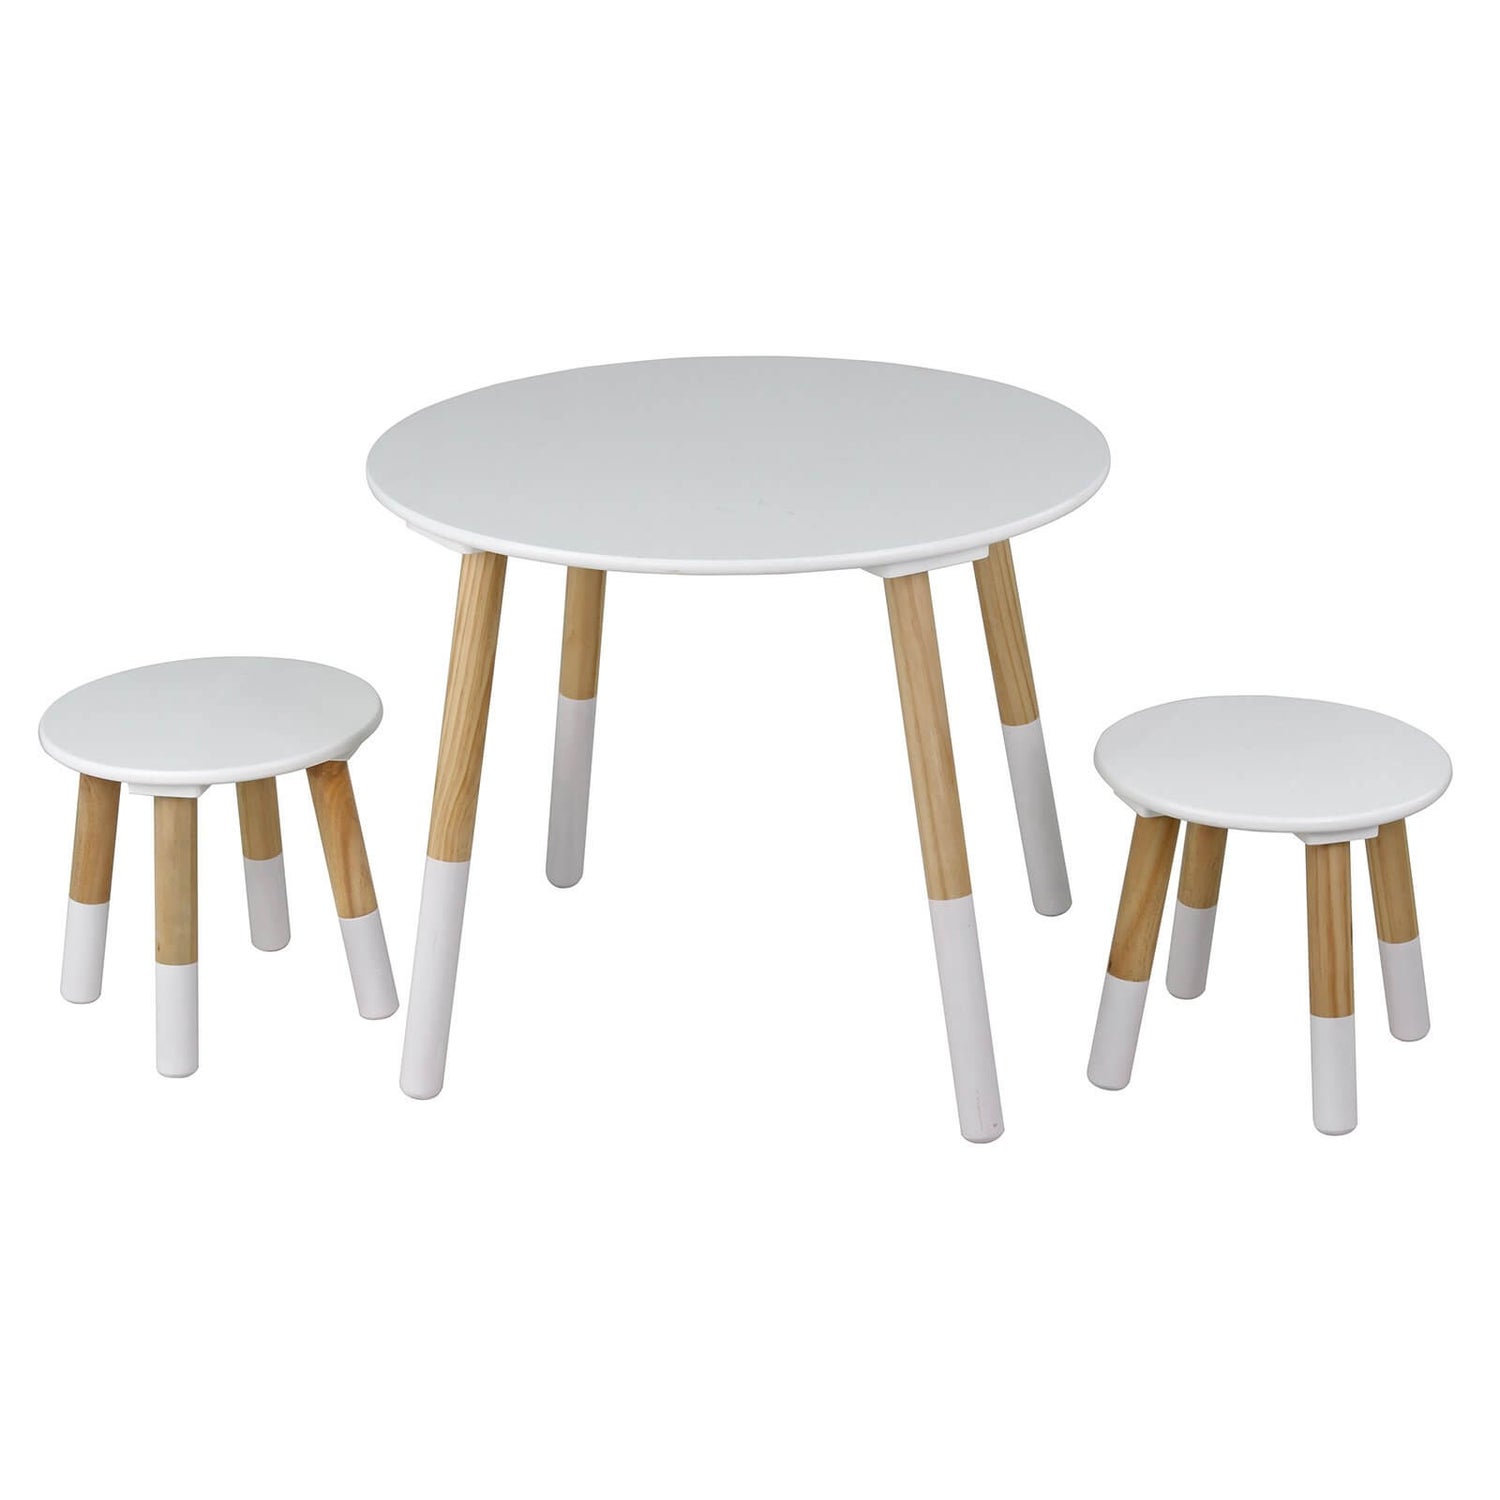 Kids Round Table With 2 Stools White, Childrens Round Wooden Table And Chairs